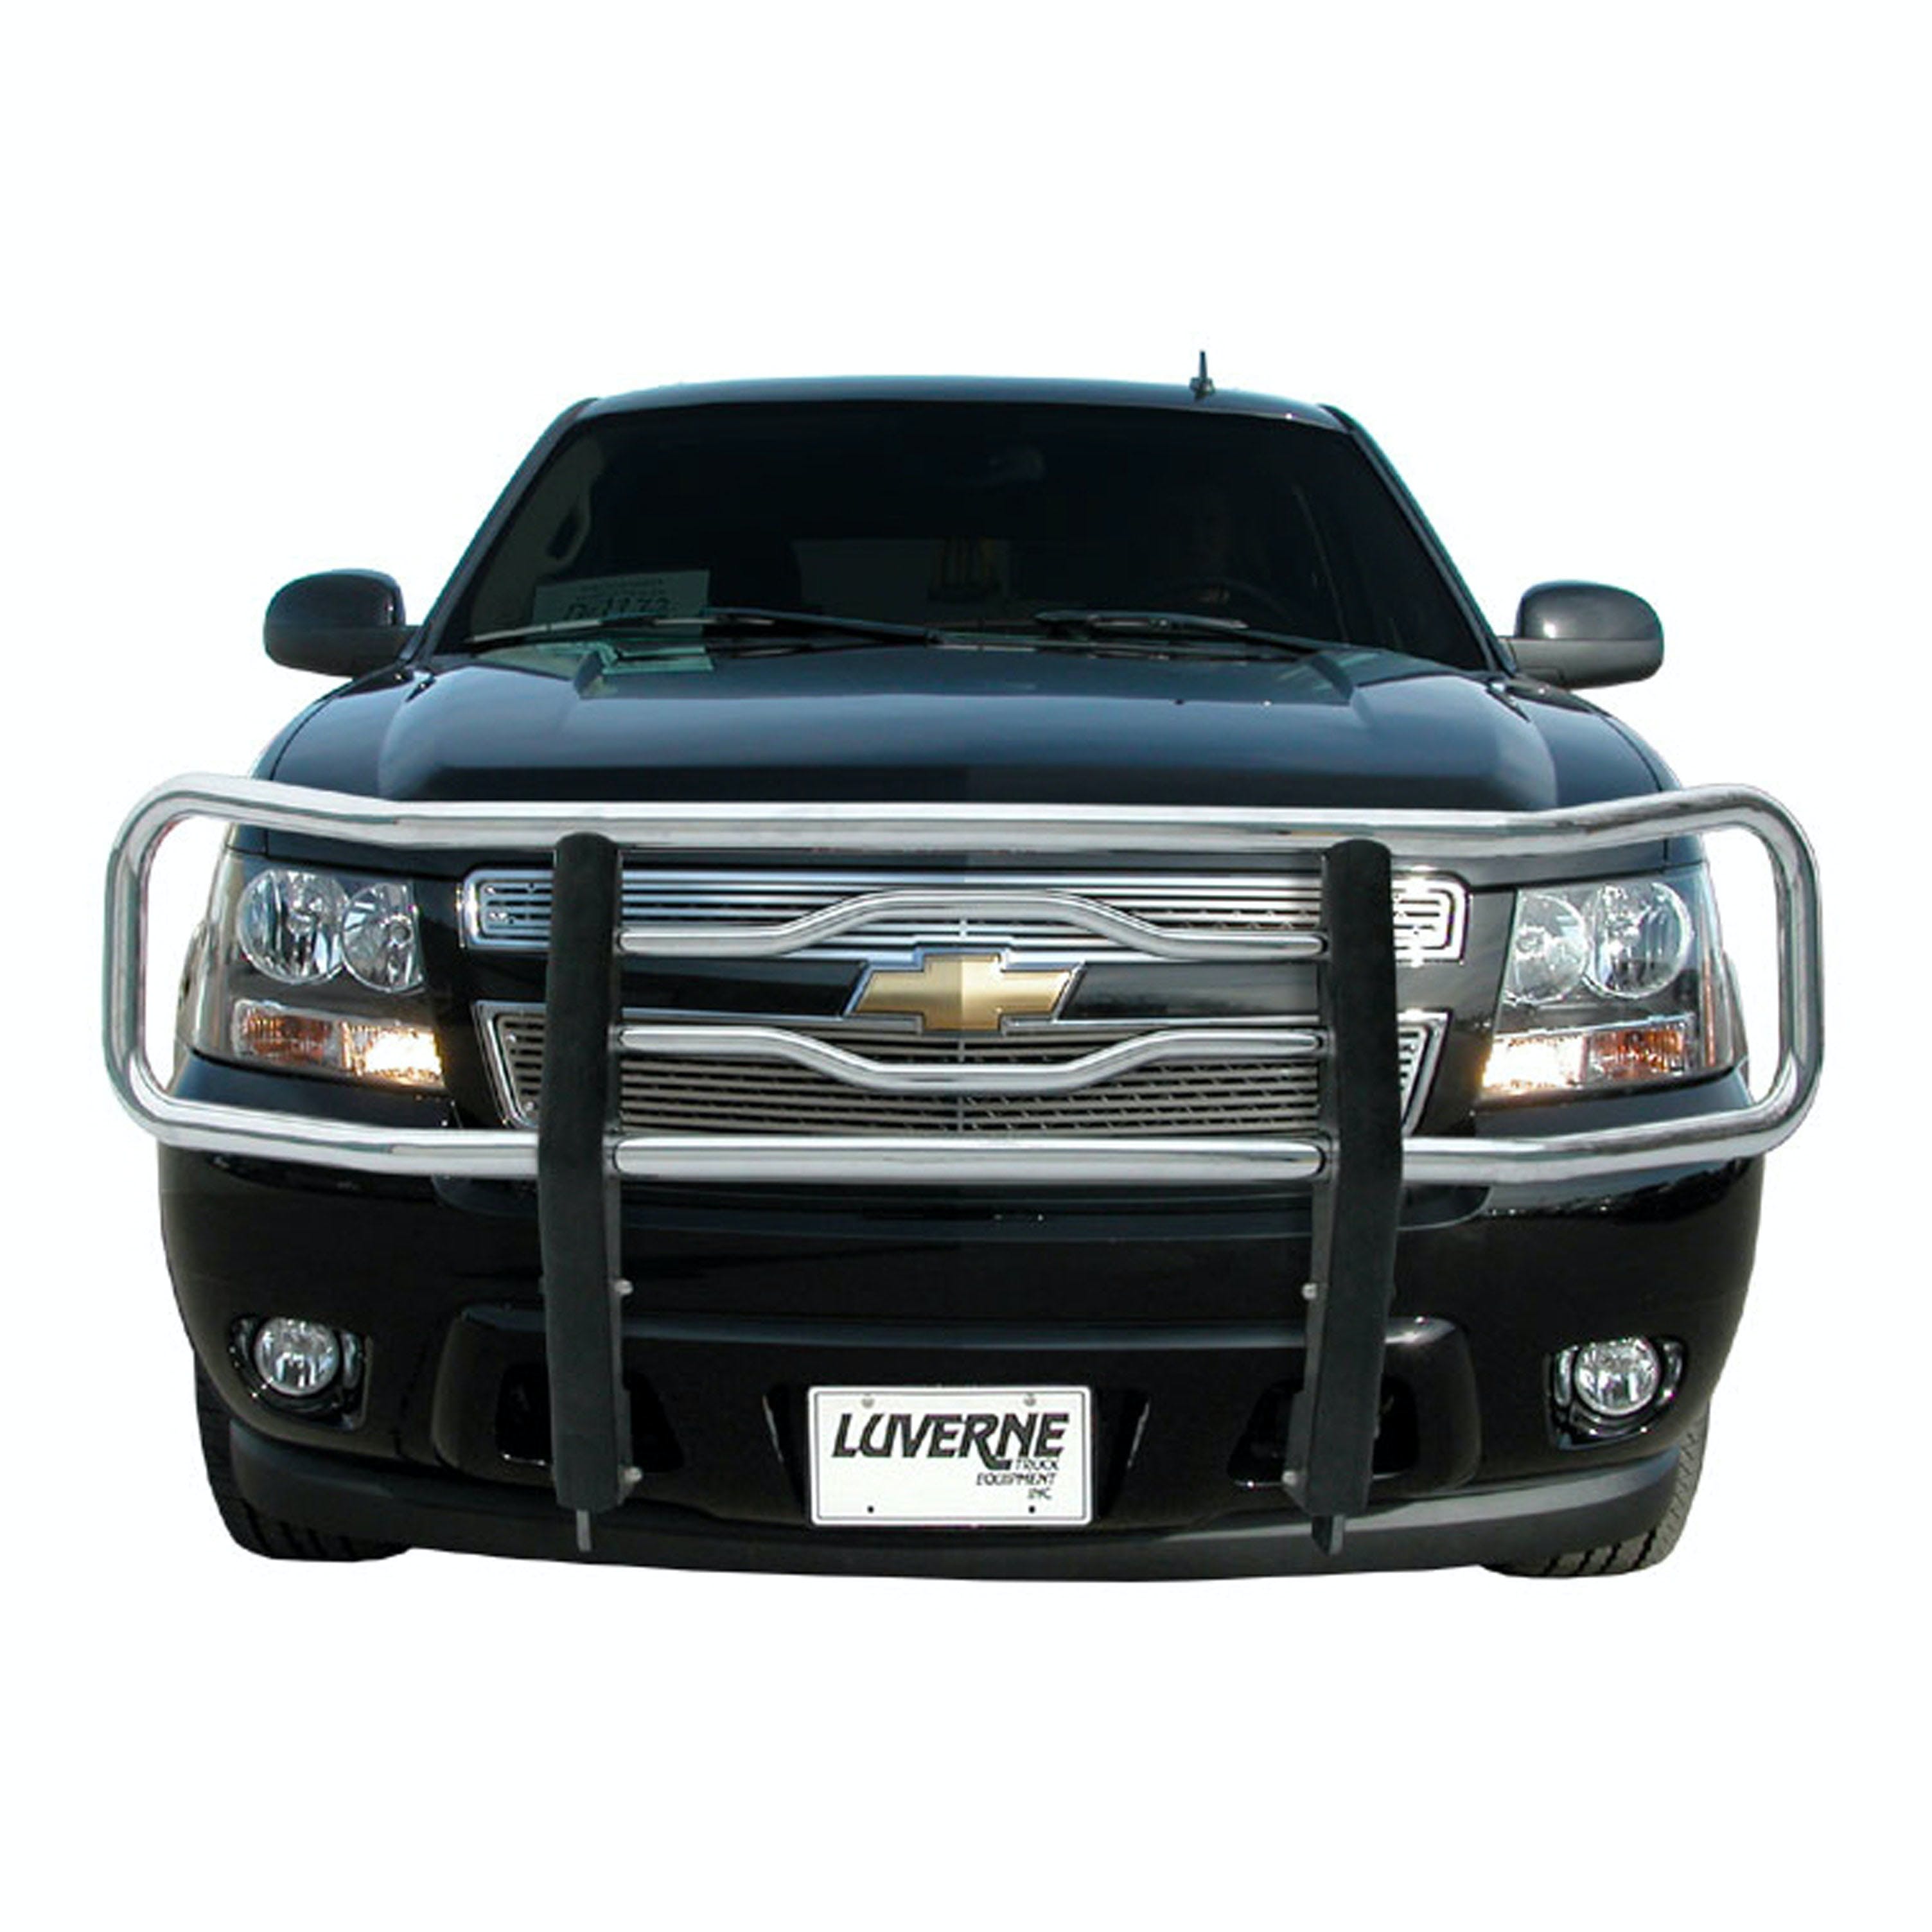 LUVERNE 330719 2 inch Tubular Grille Guard Ring Assembly